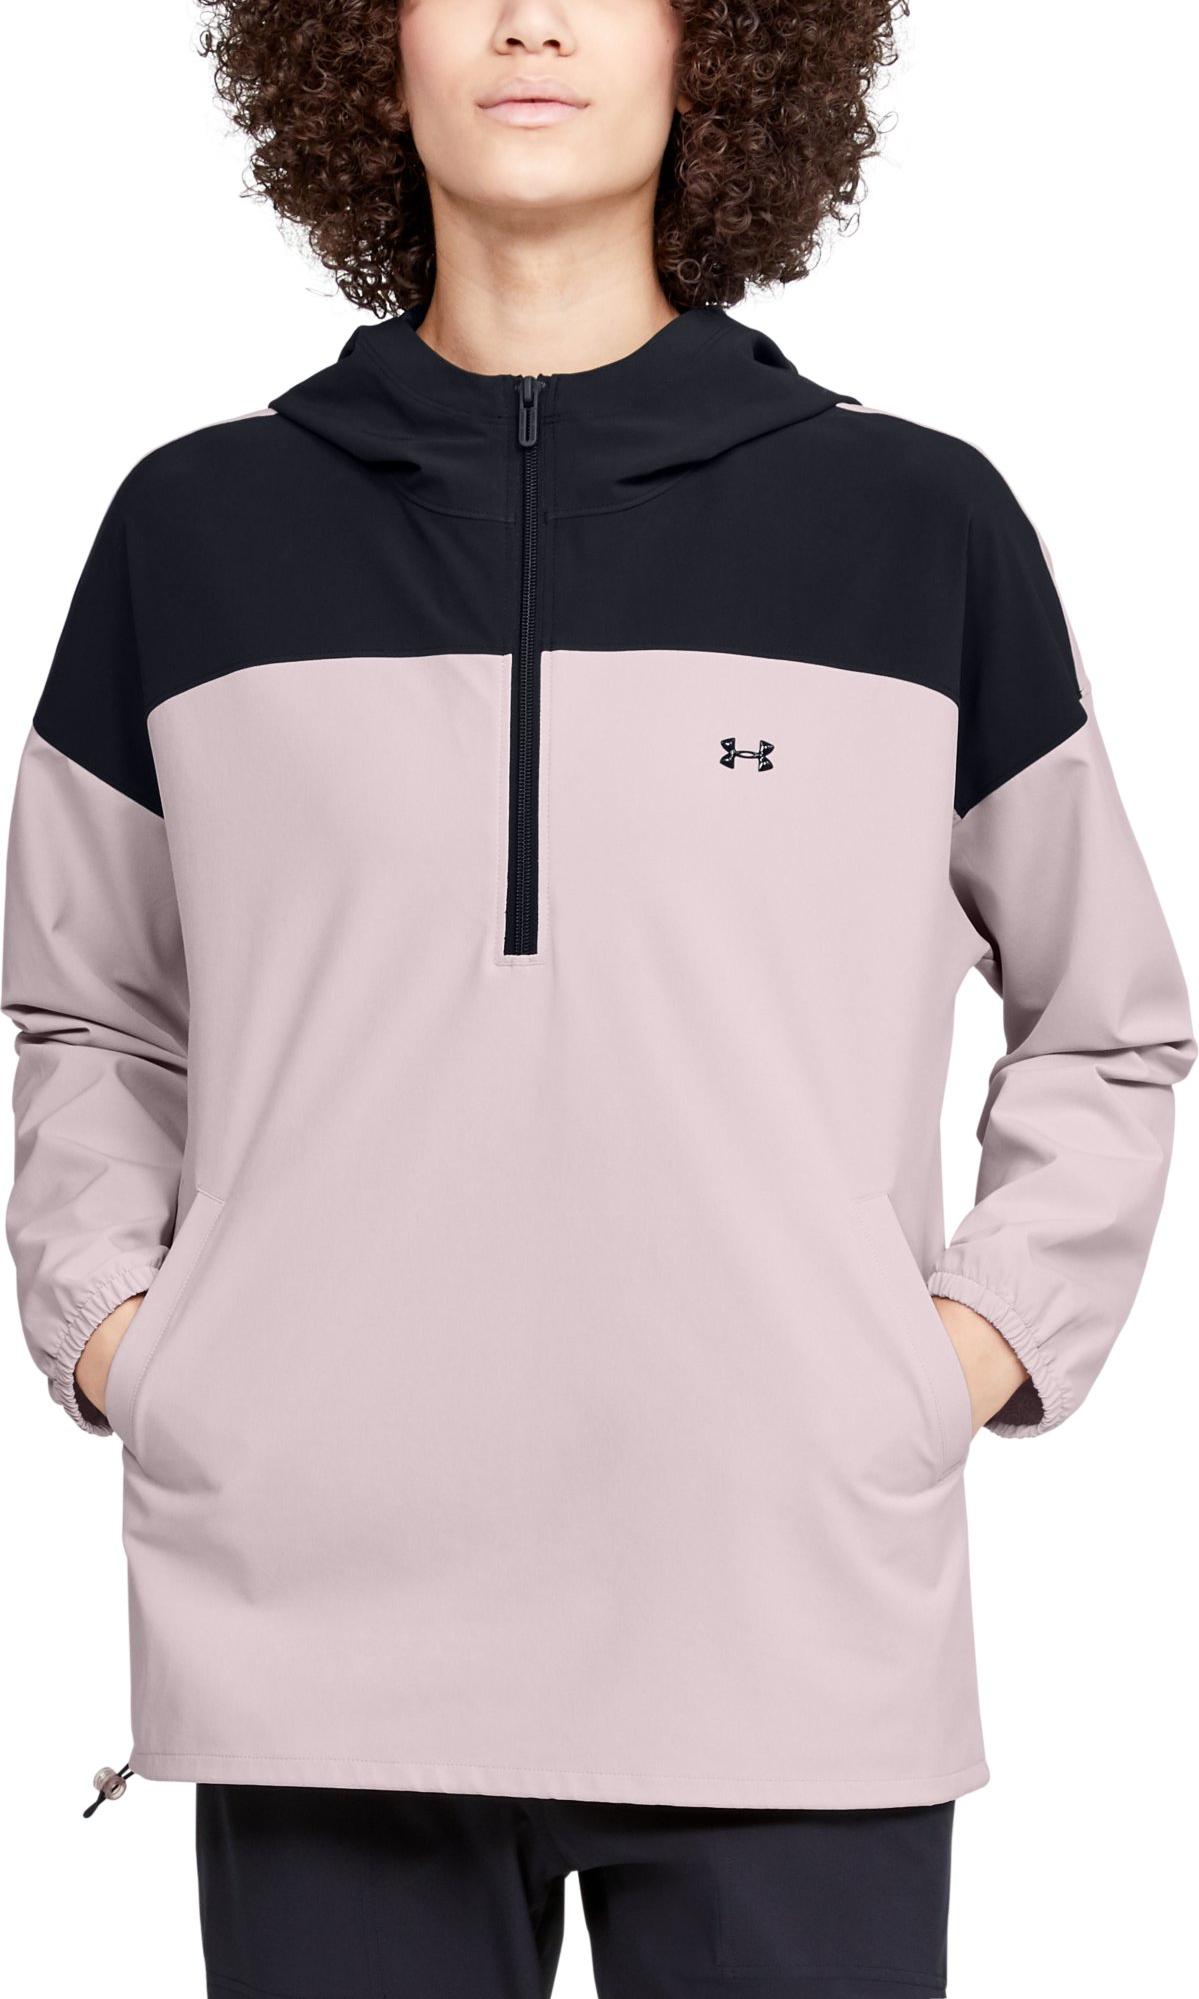 recovery under armour